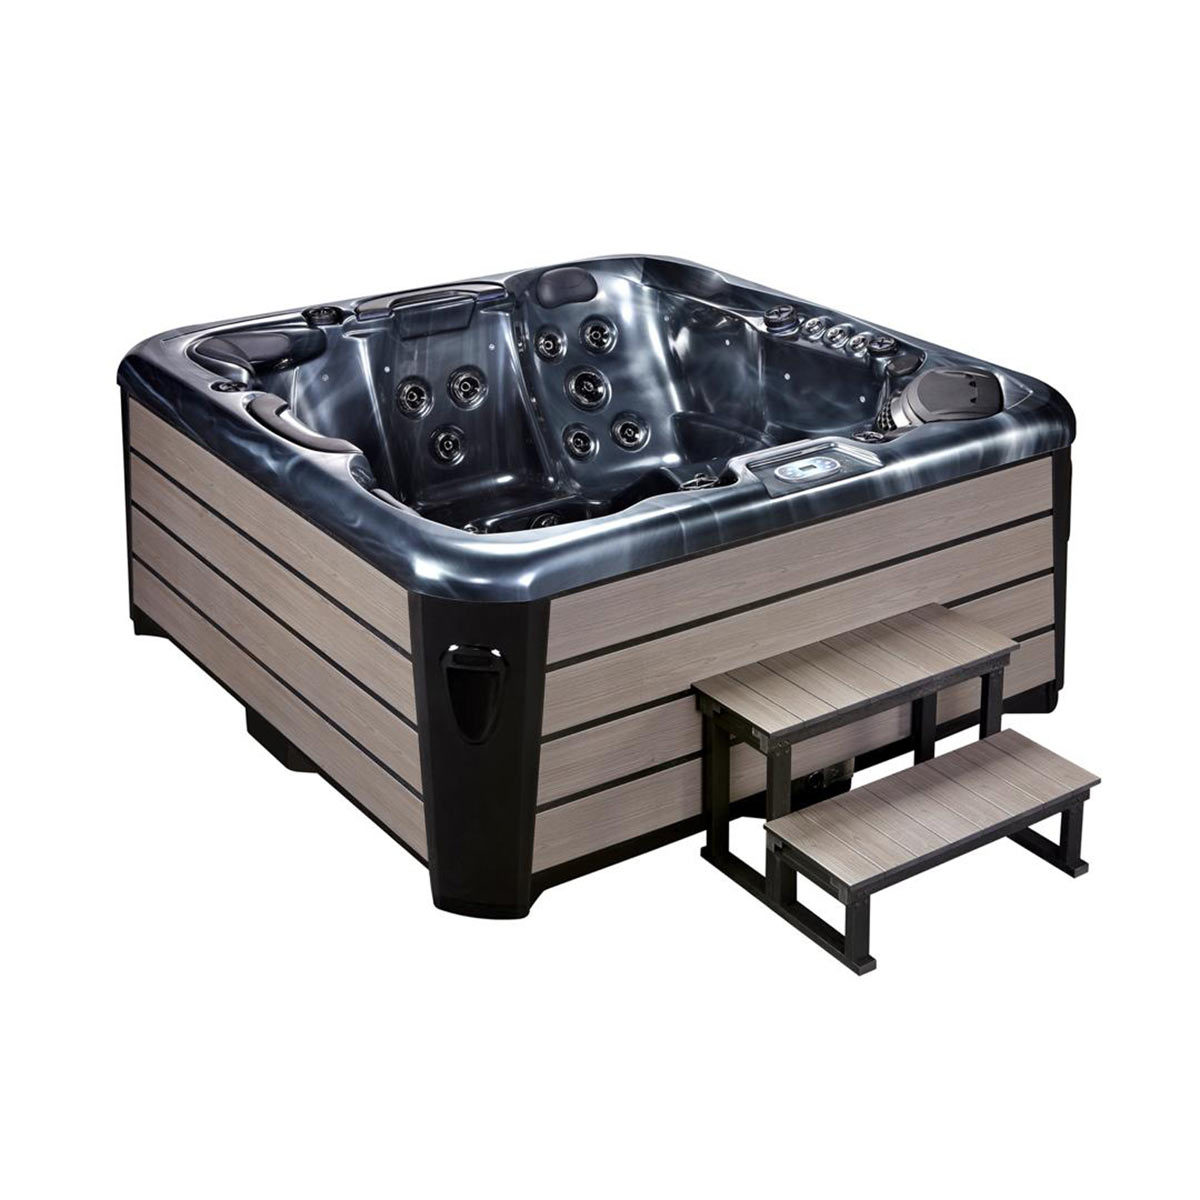 Platinum Spas Rhodes 54 Jet 5 Person Hot Tub Delivered And Installed In Black Costco Uk